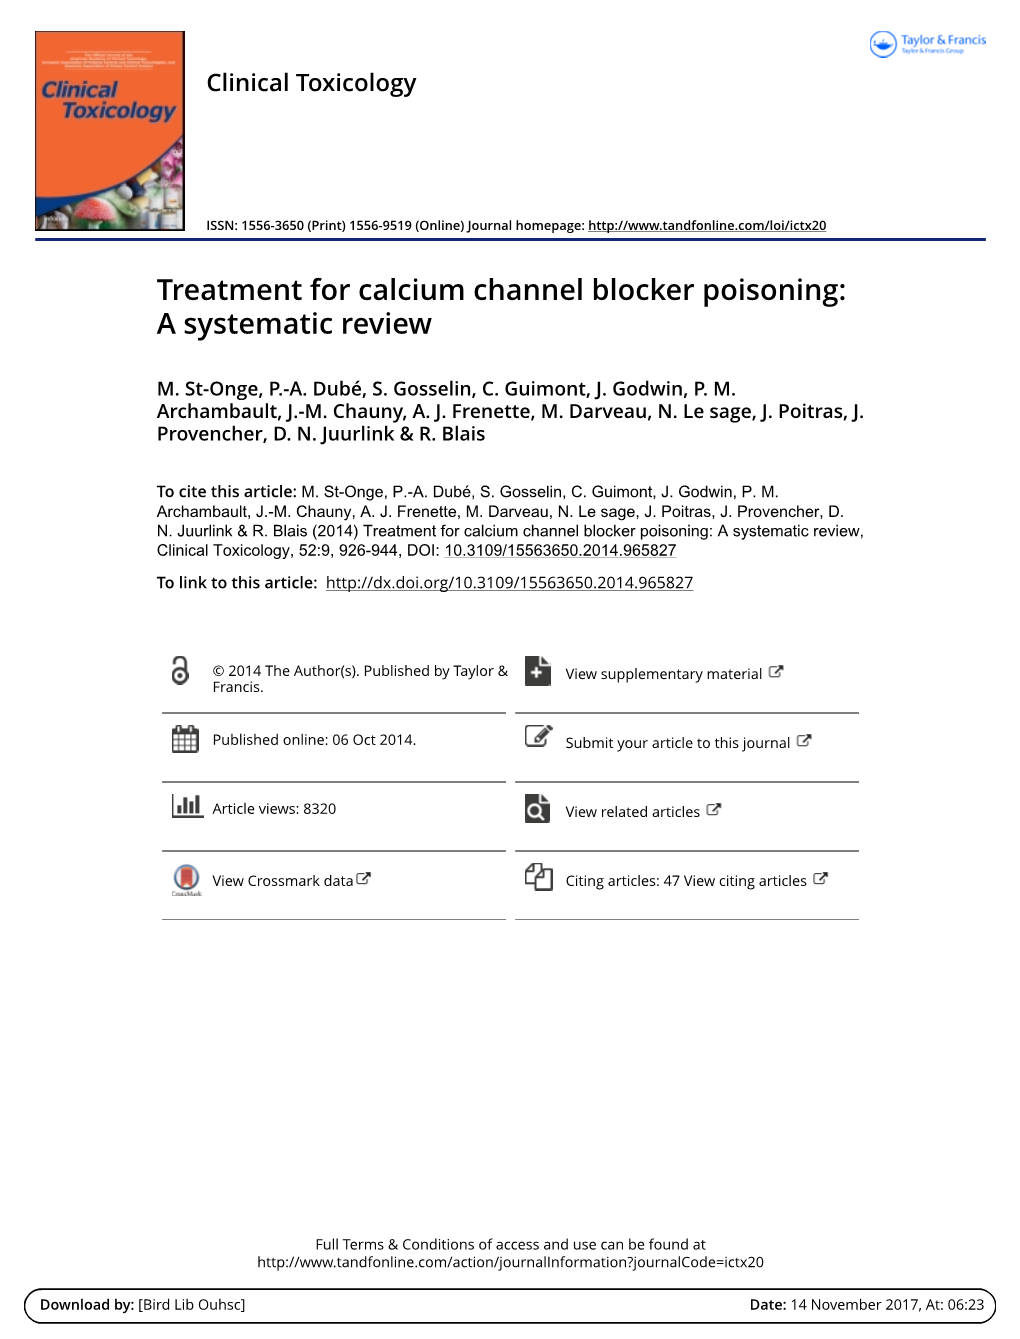 Treatment for Calcium Channel Blocker Poisoning a Systematic Review